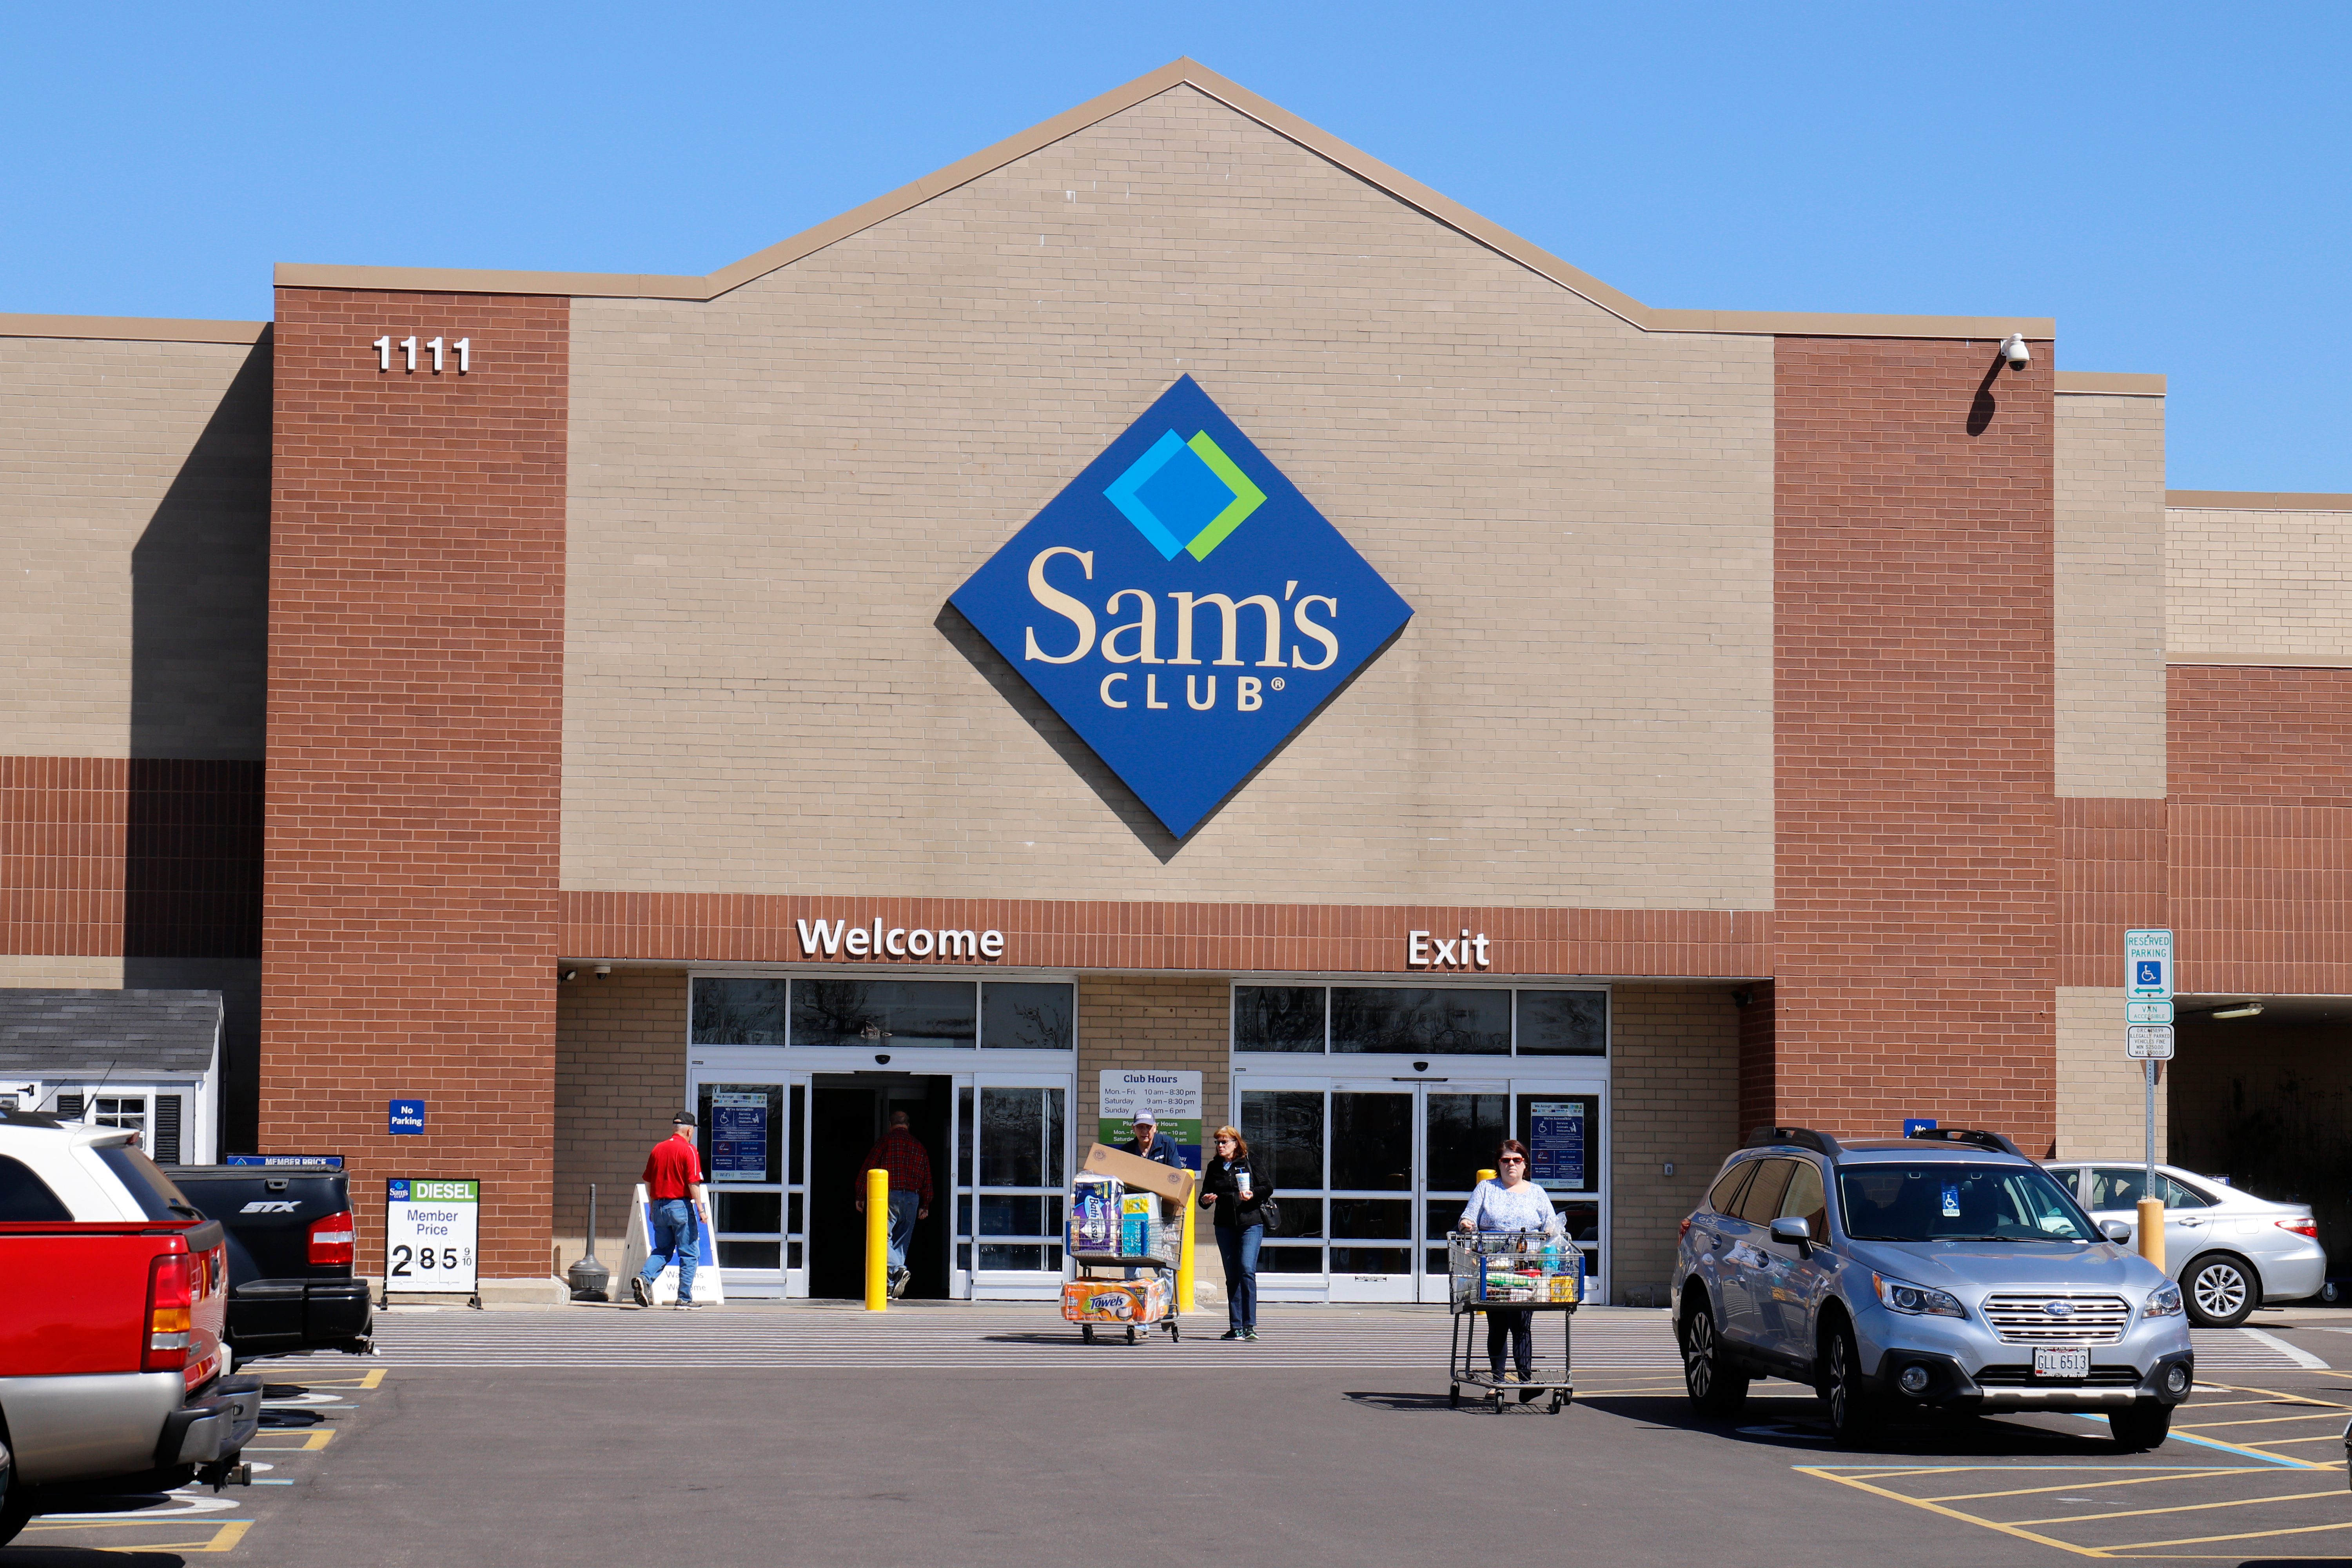 Sam's Wholesale Directions While sam's club isn't quite as aligned to